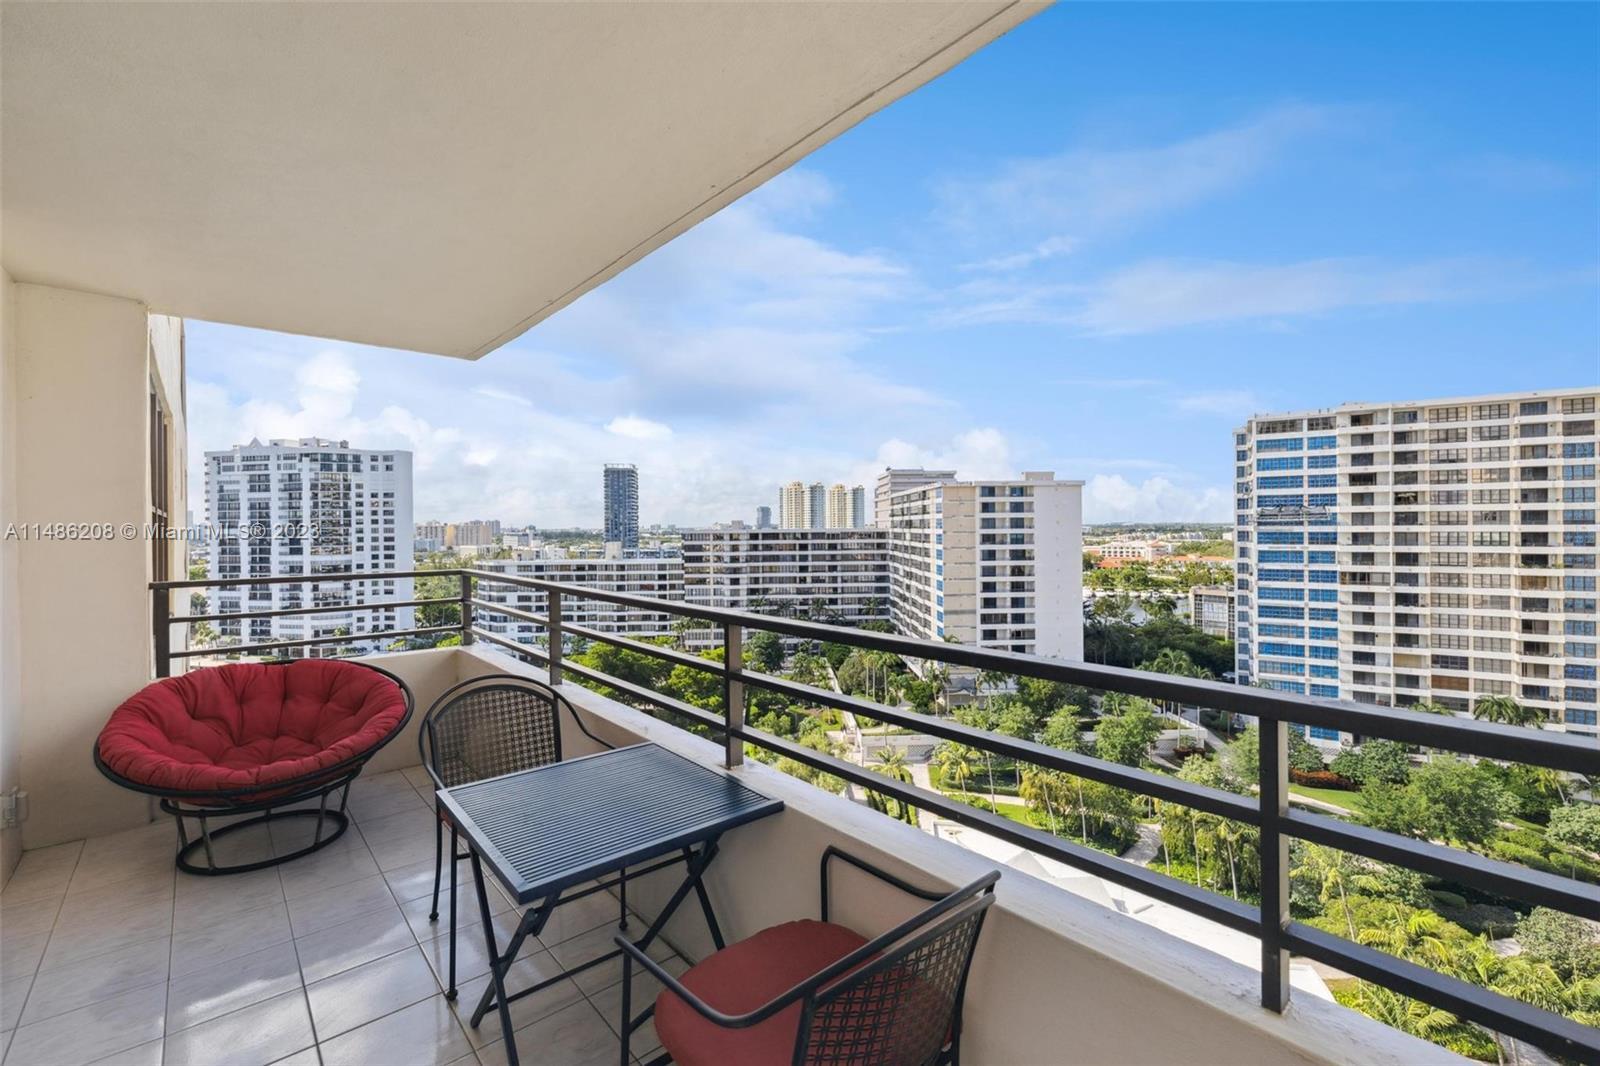 Photo of 2500 Parkview Dr #1520 in Hallandale Beach, FL